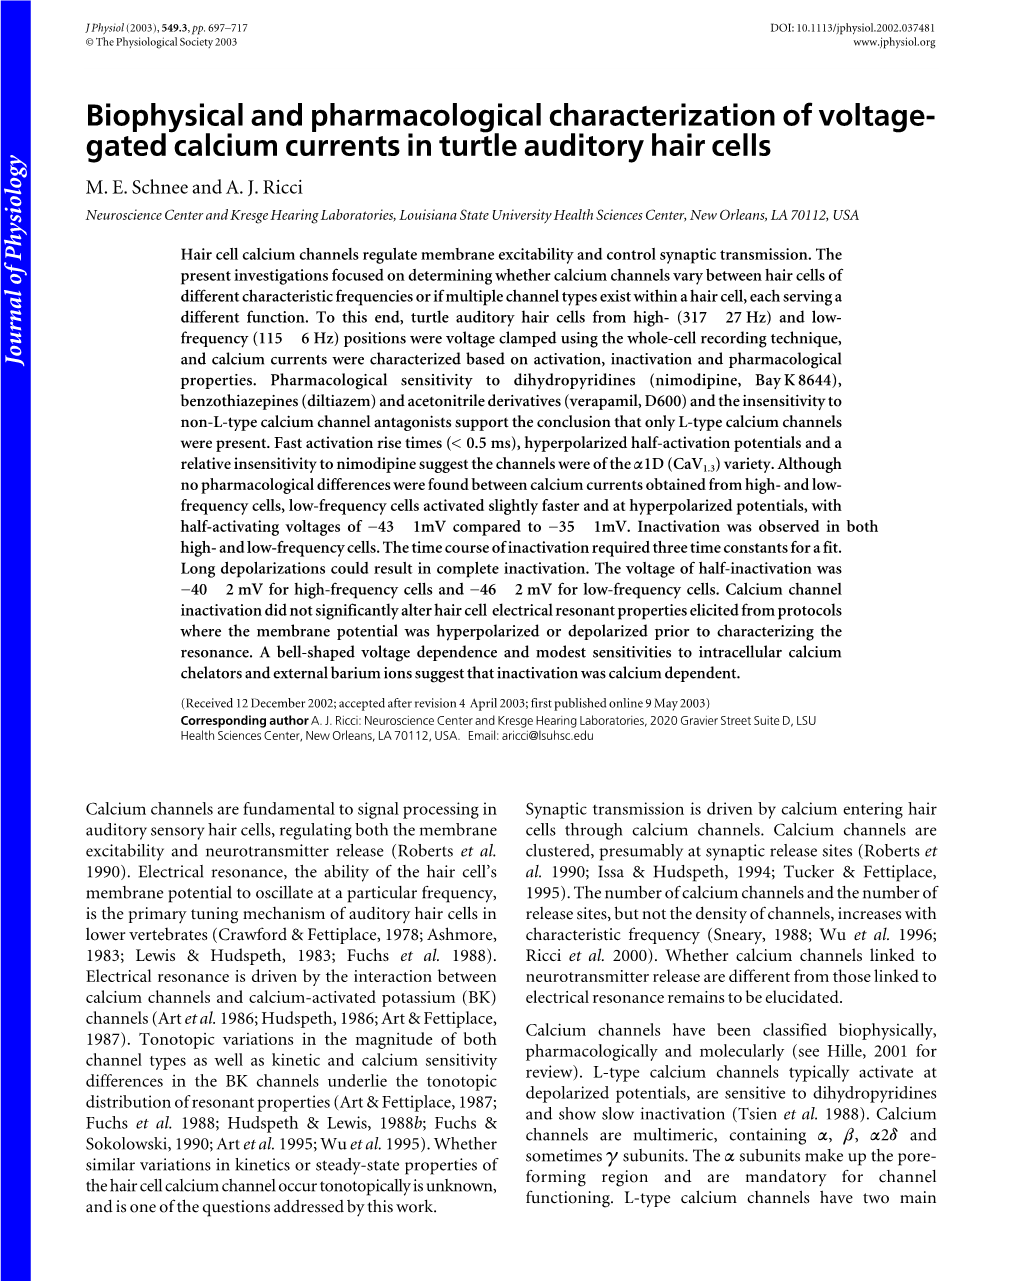 Gated Calcium Currents in Turtle Auditory Hair Cells